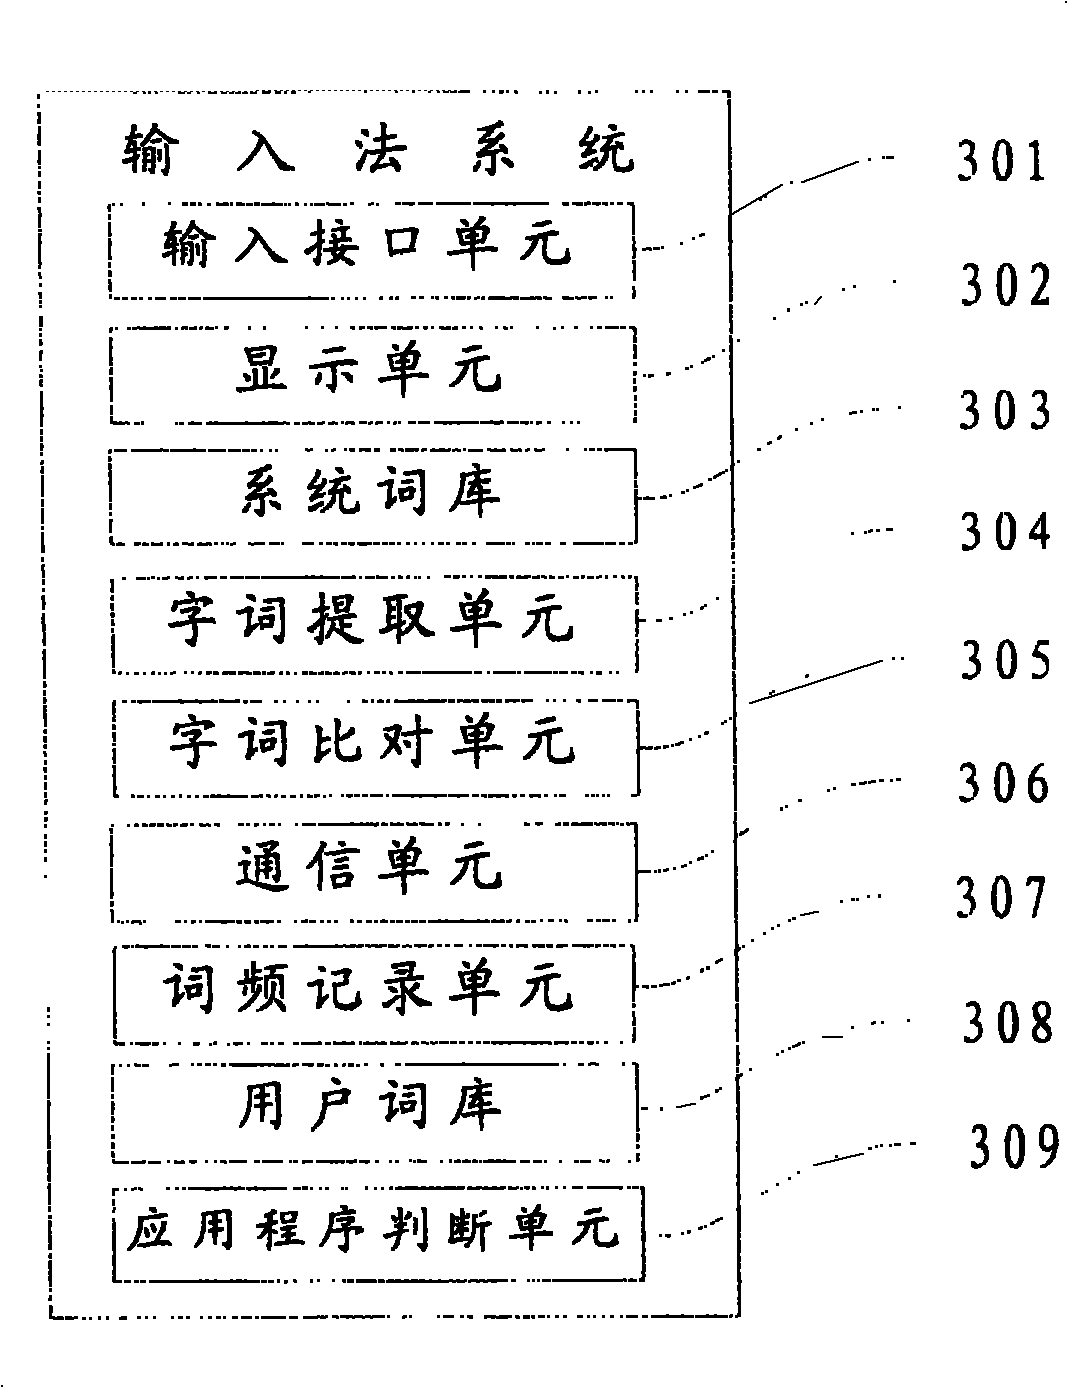 Method for obtaining newly encoded character string, input method system and word stock generation device